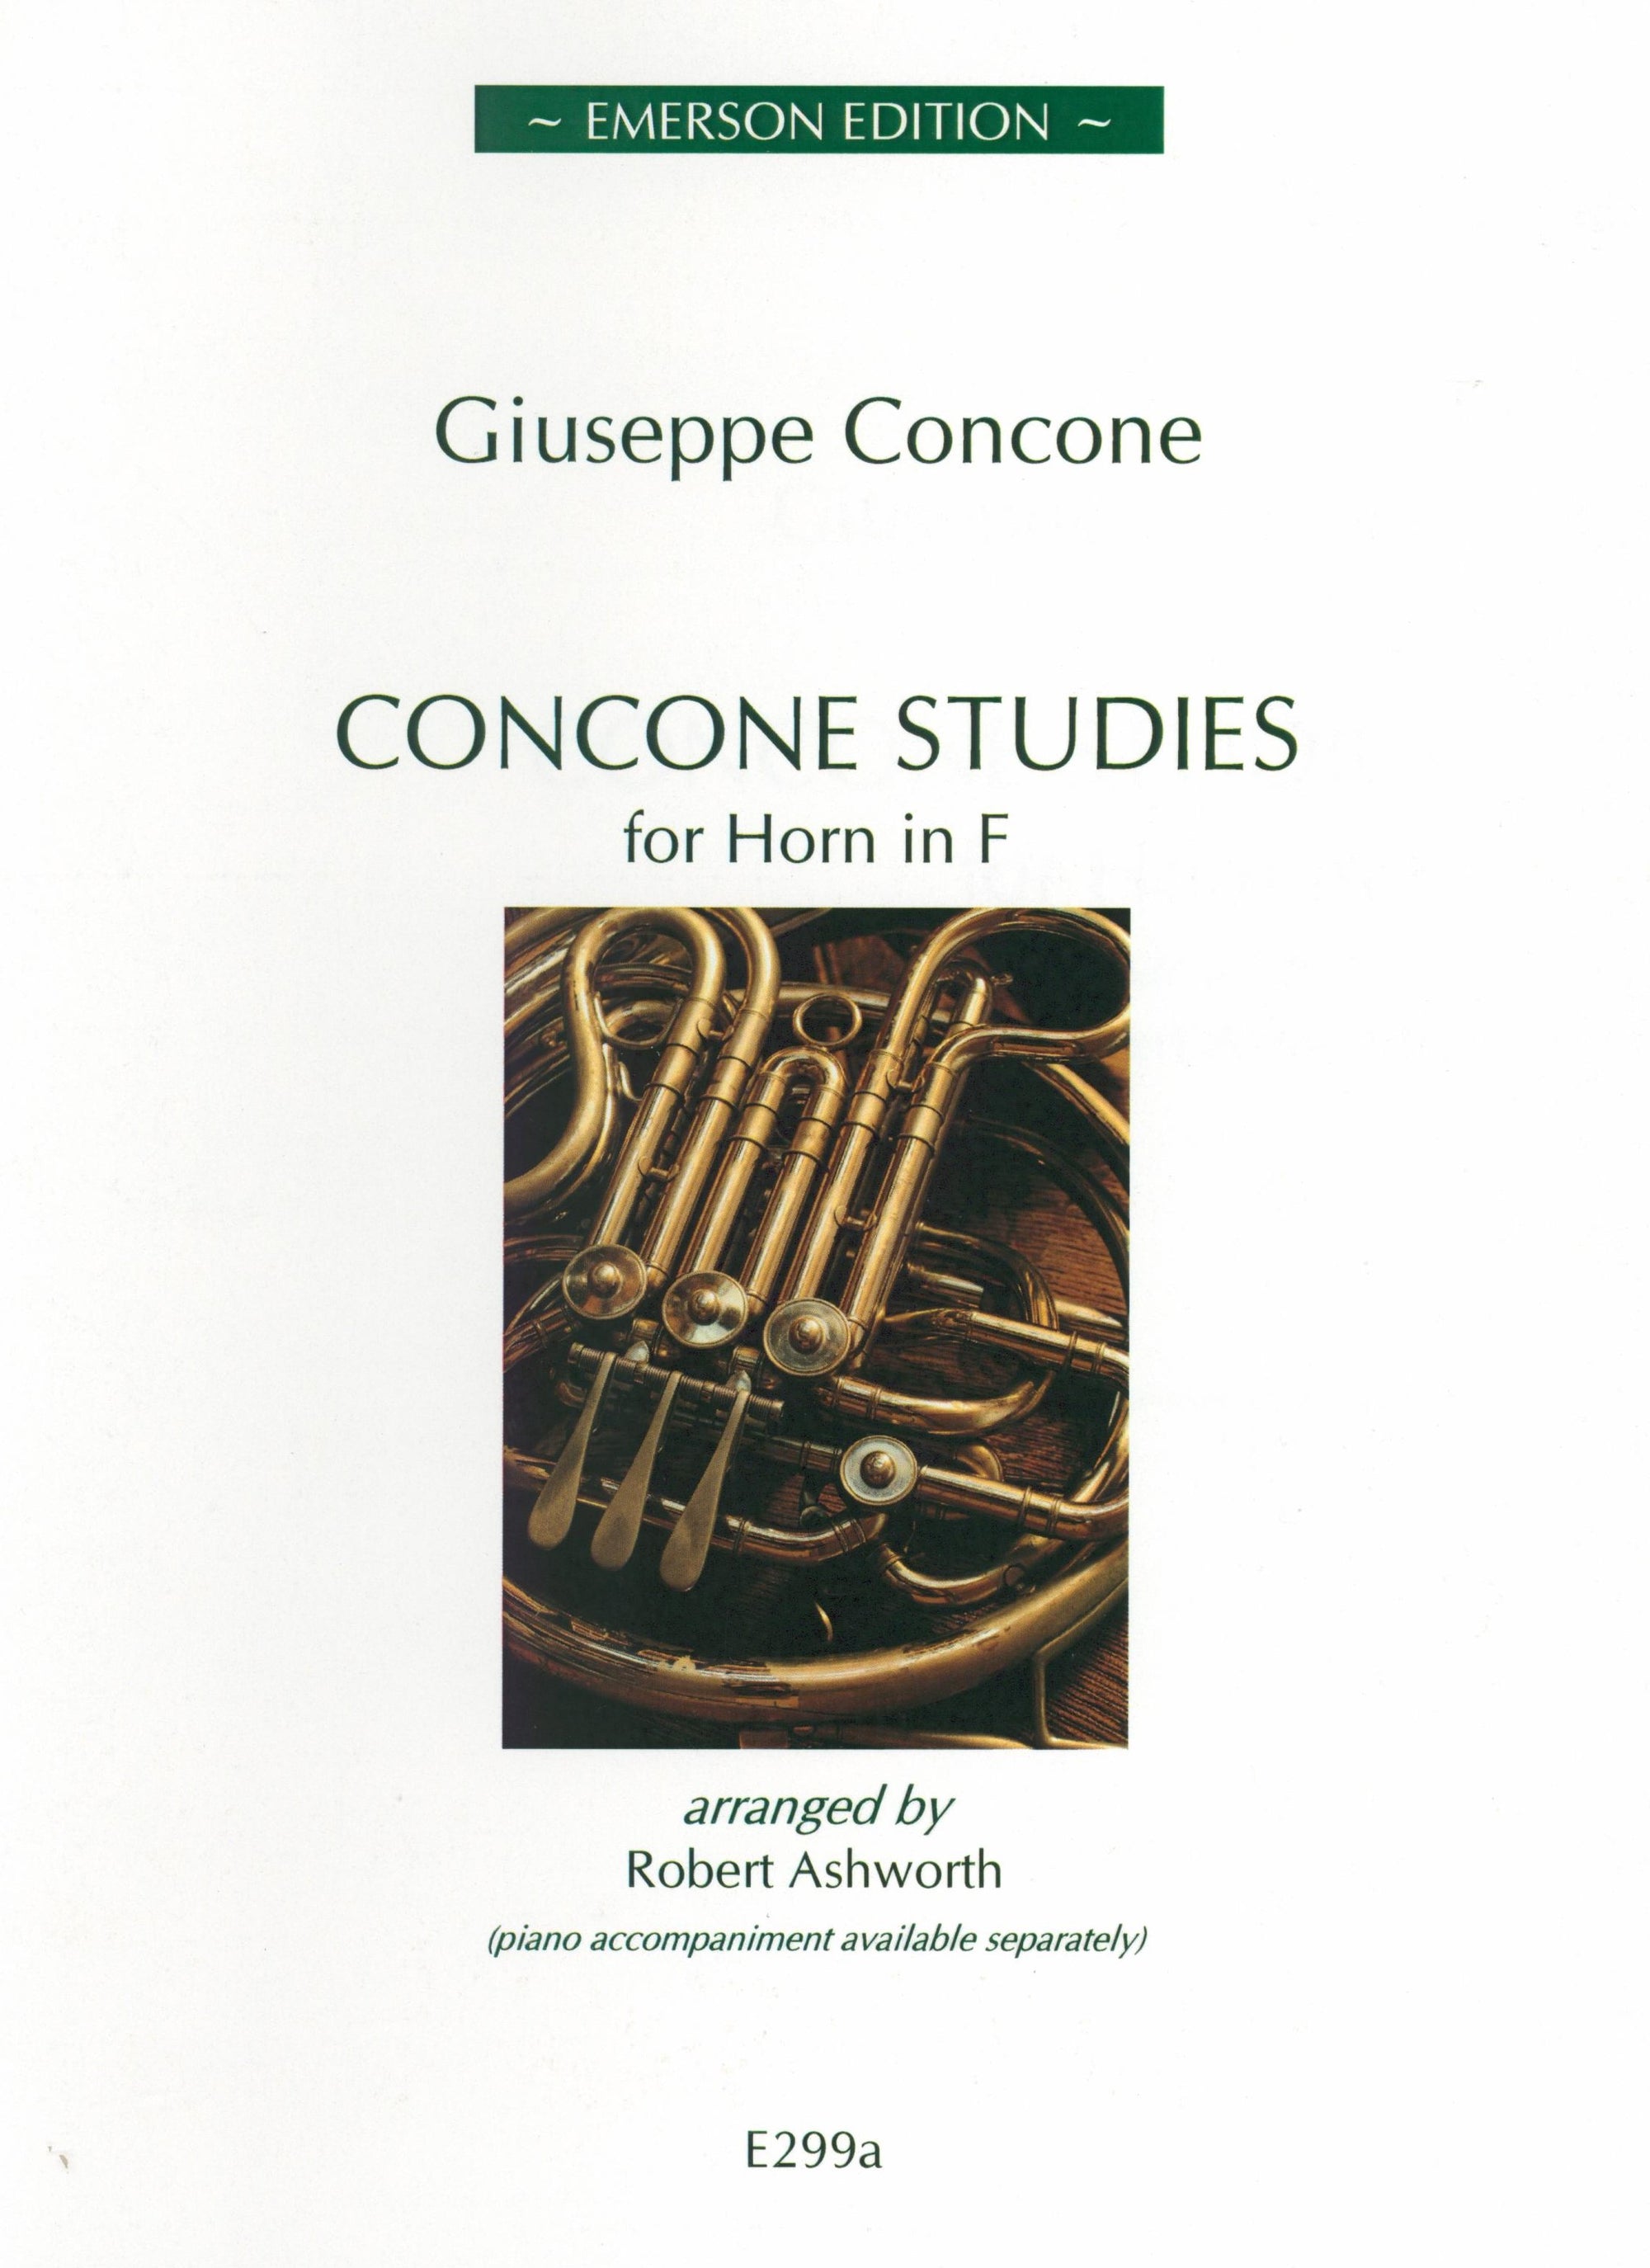 Concone Studies for Horn